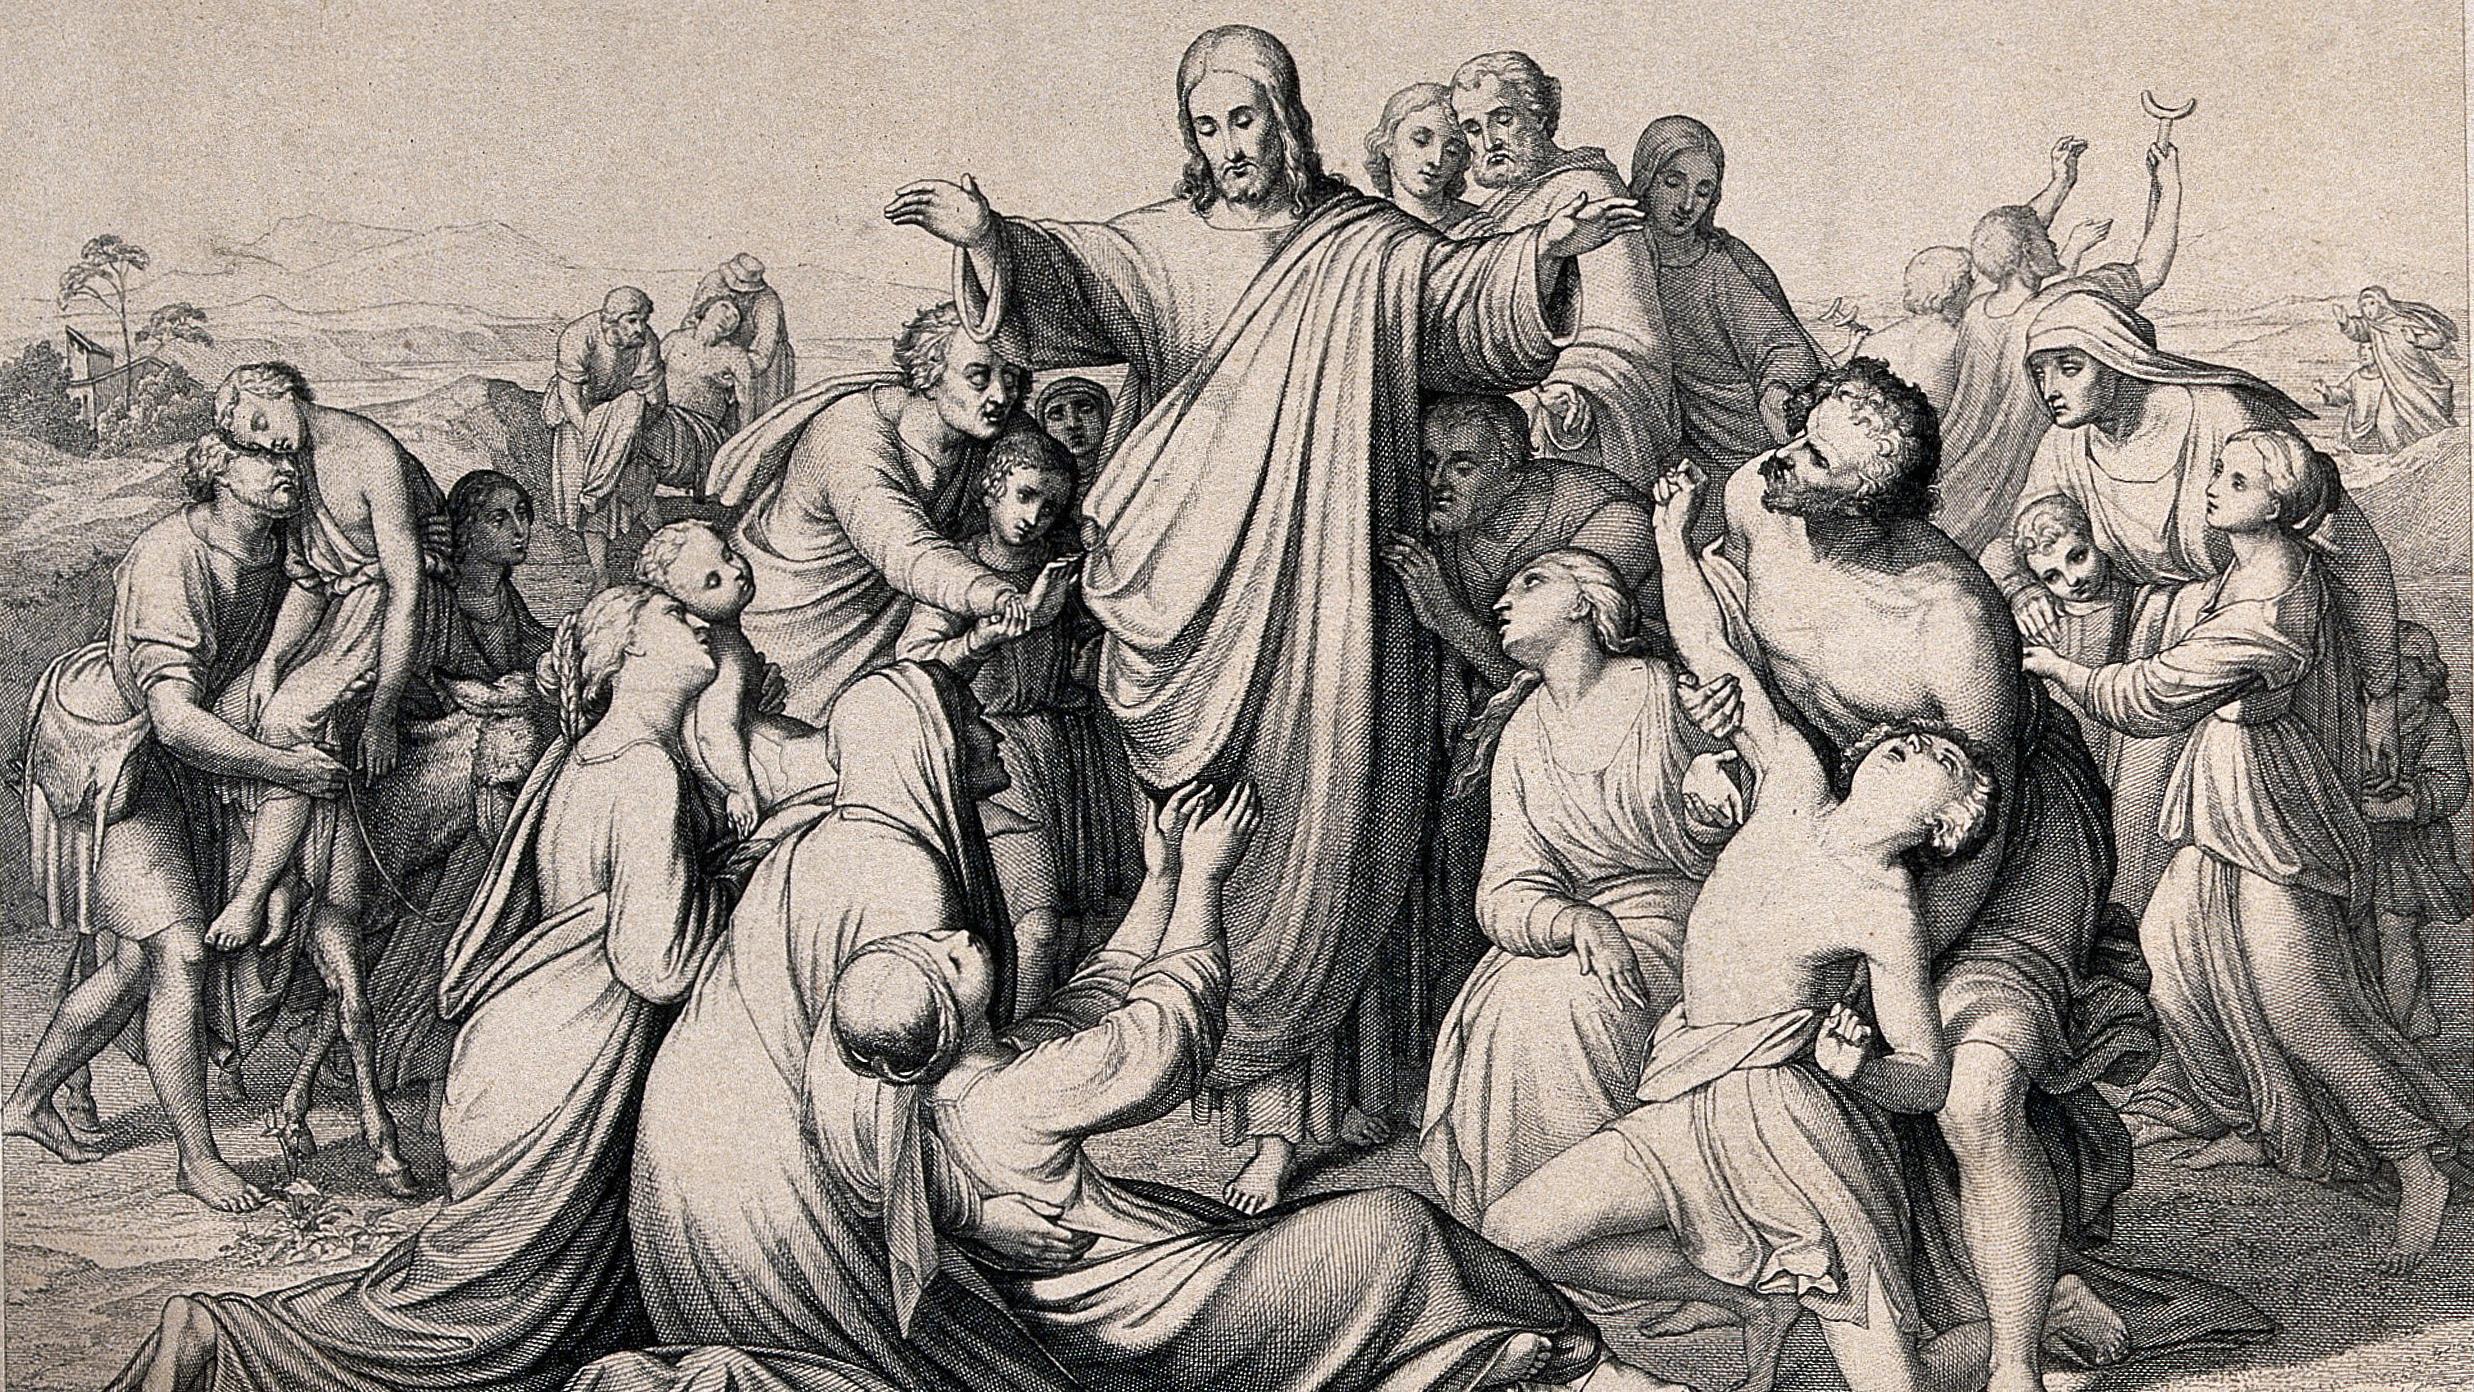 The engraving shows a depiction of Jesus Christ surrounded by people. 